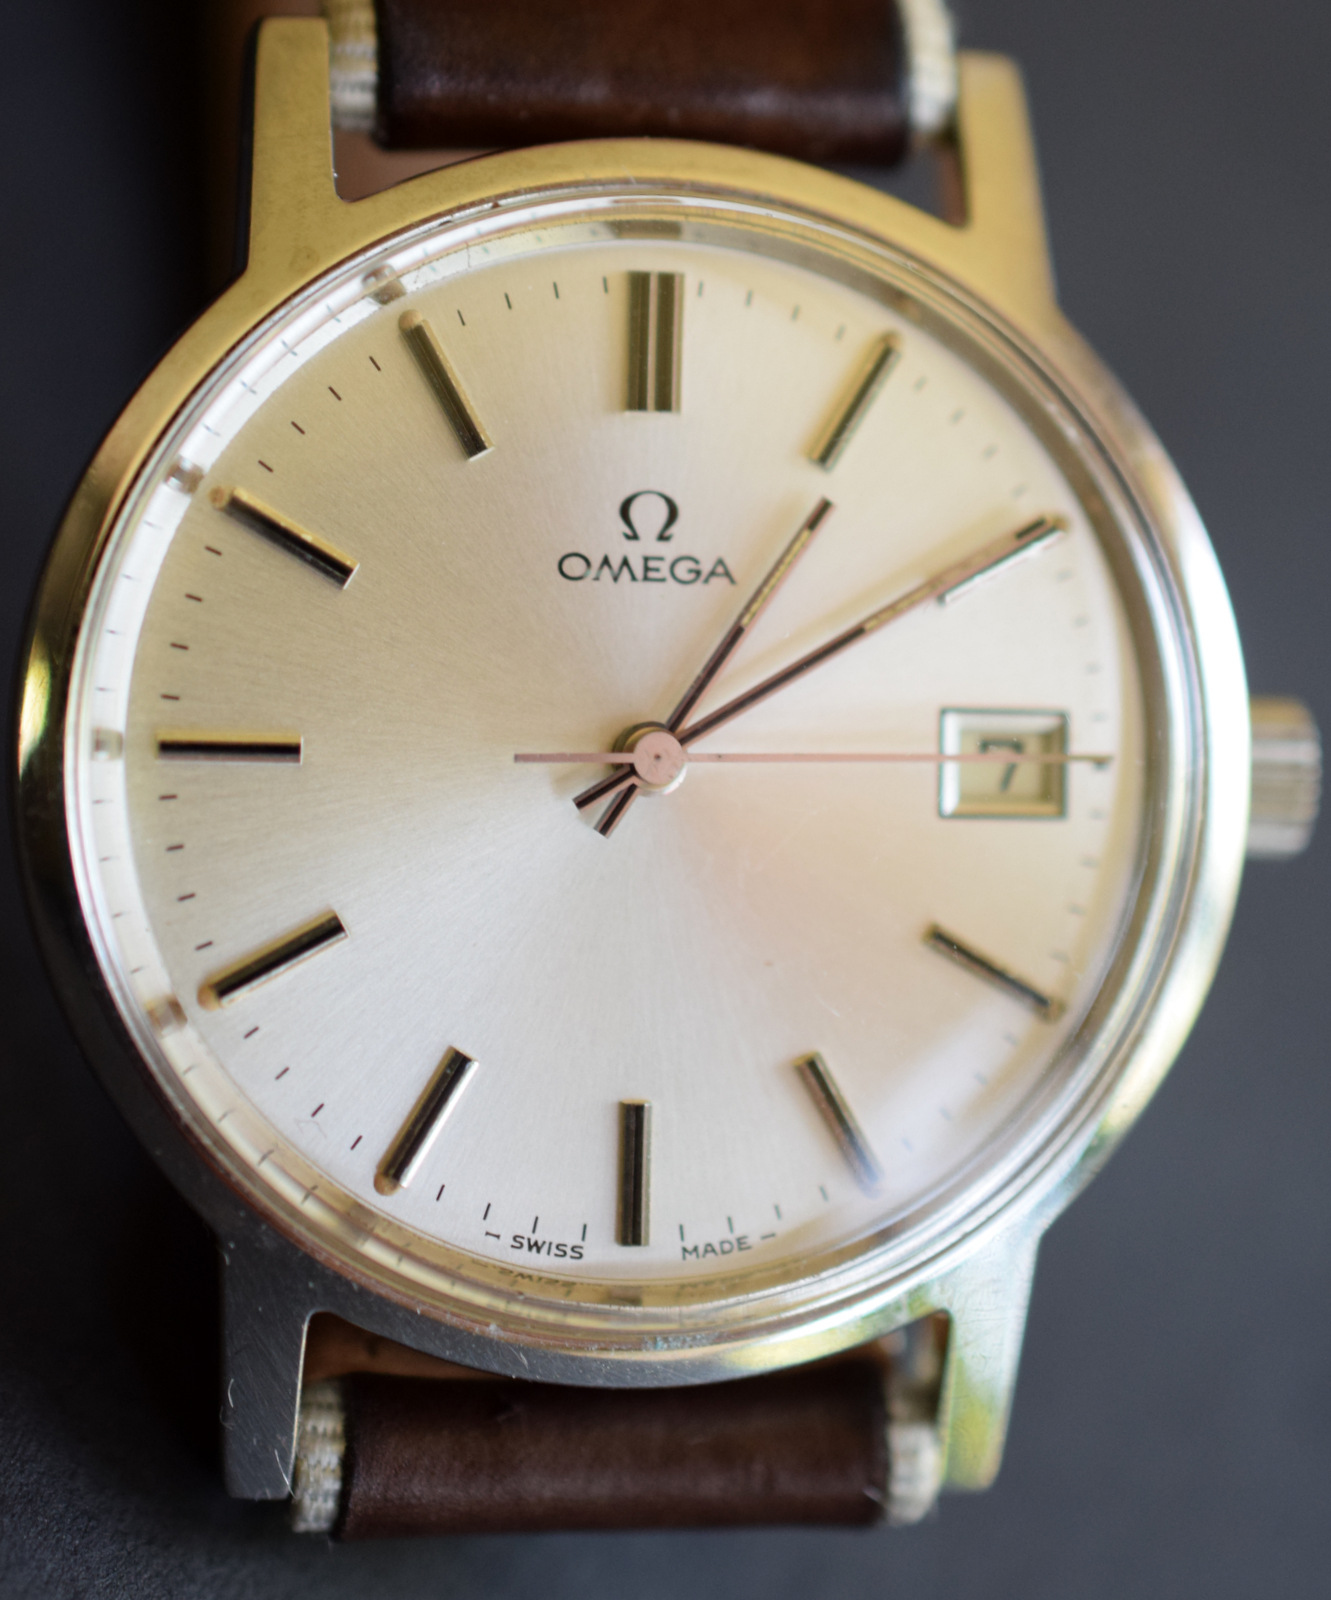 Vintage Omega Manual Wind Date Watch - Image 13 of 18